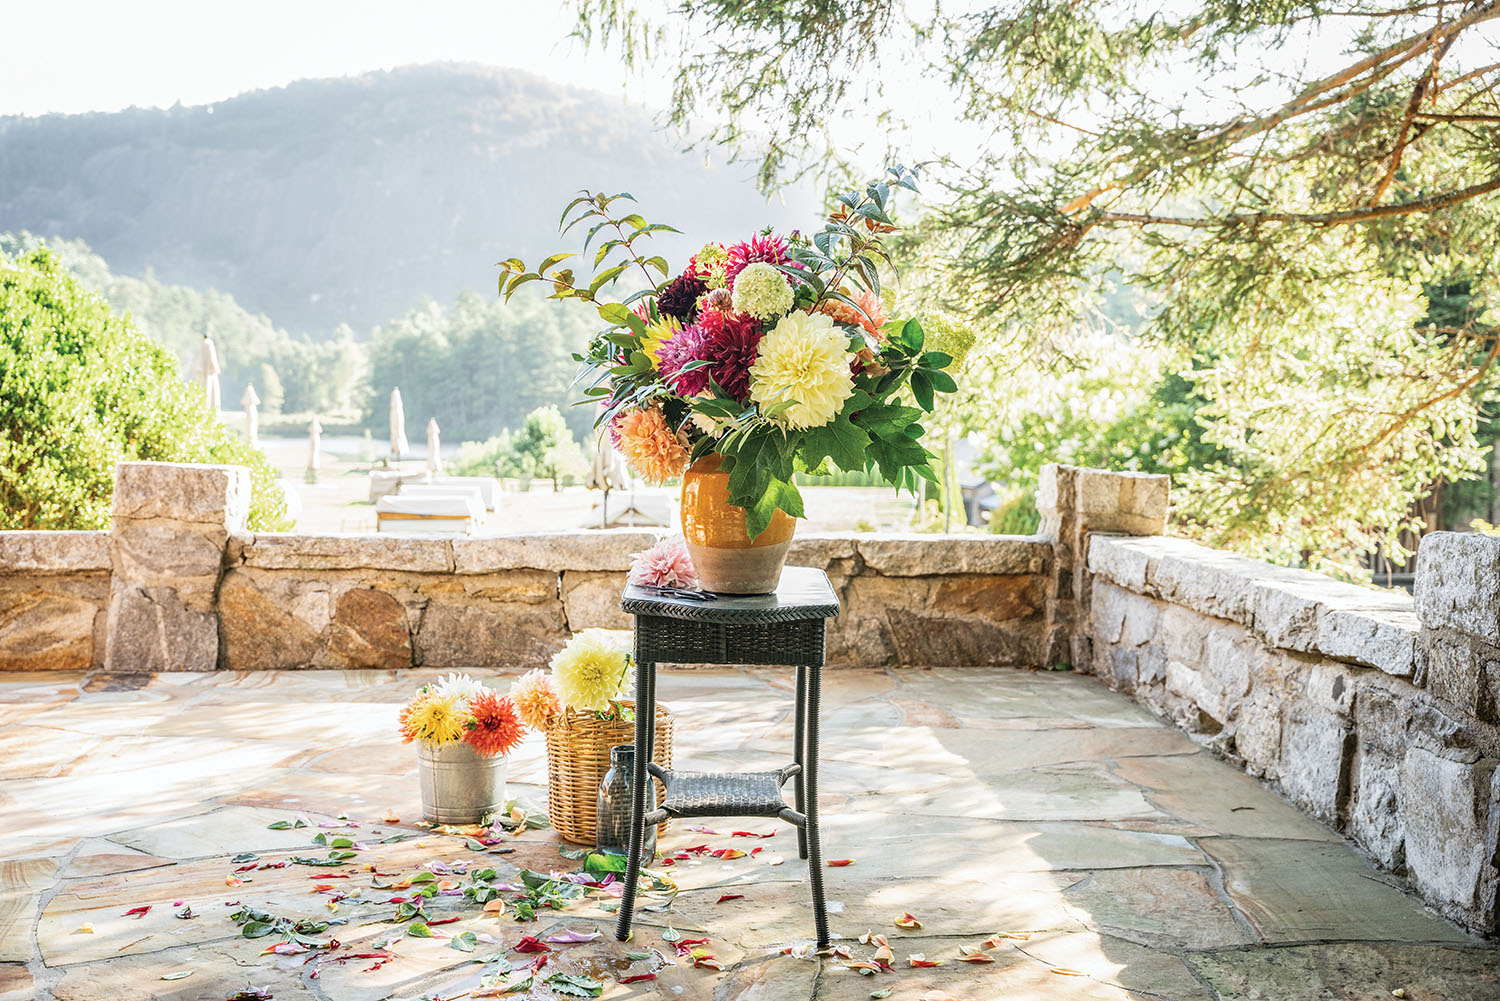 A vase full of fully colorful dahlias on a stool outdoors.